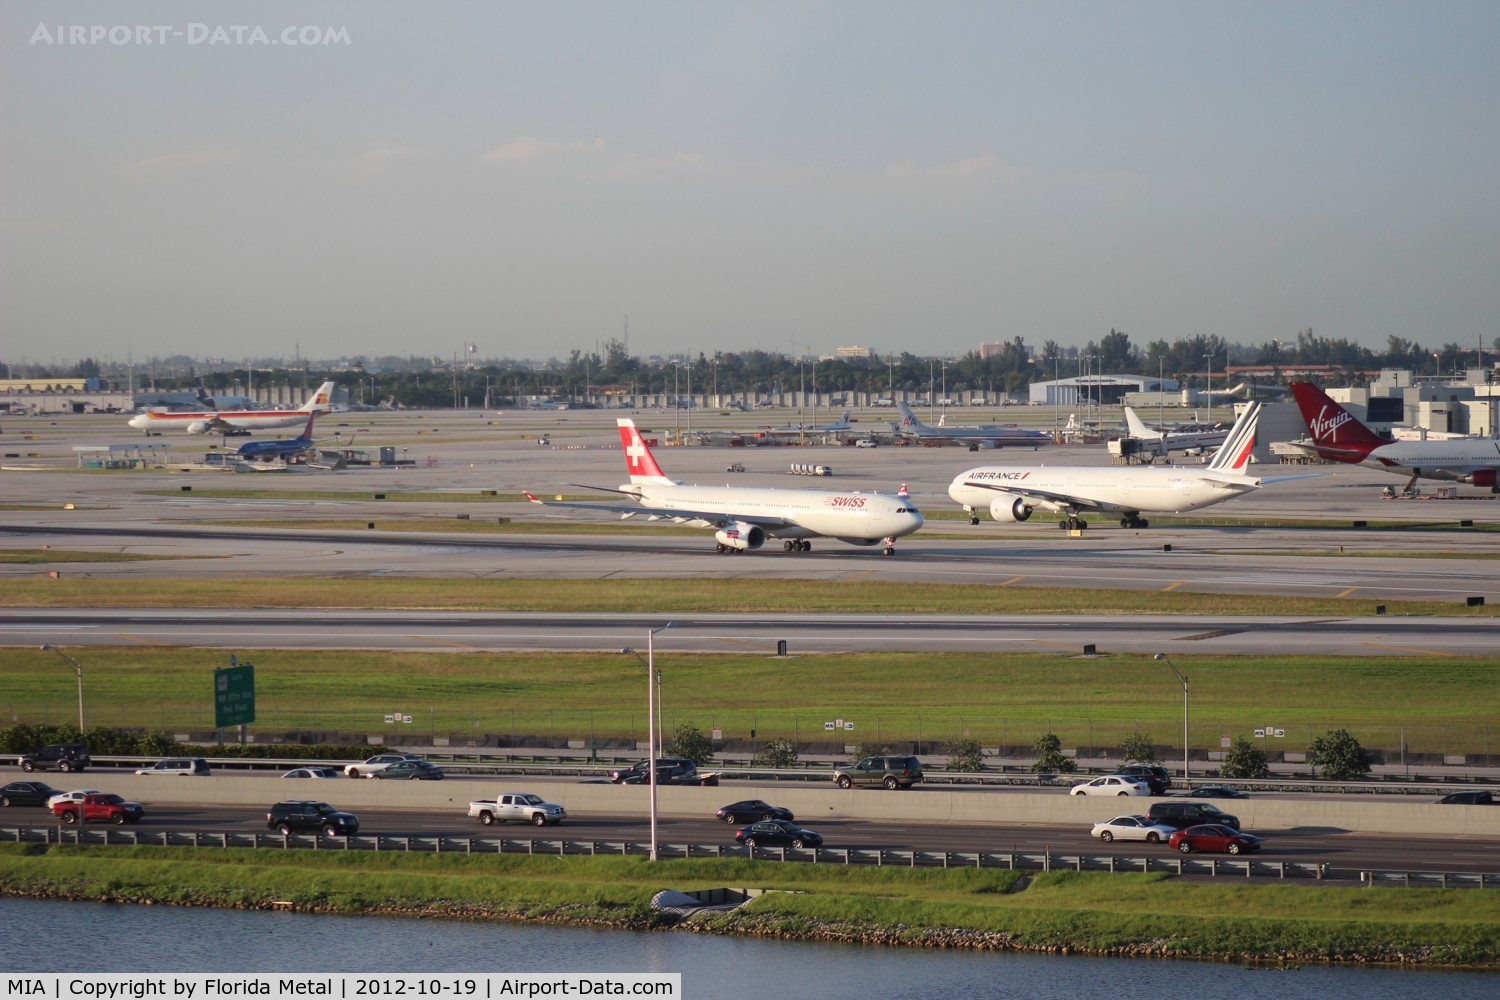 Miami International Airport (MIA) - Swiss inbound with Air France outbound at MIA